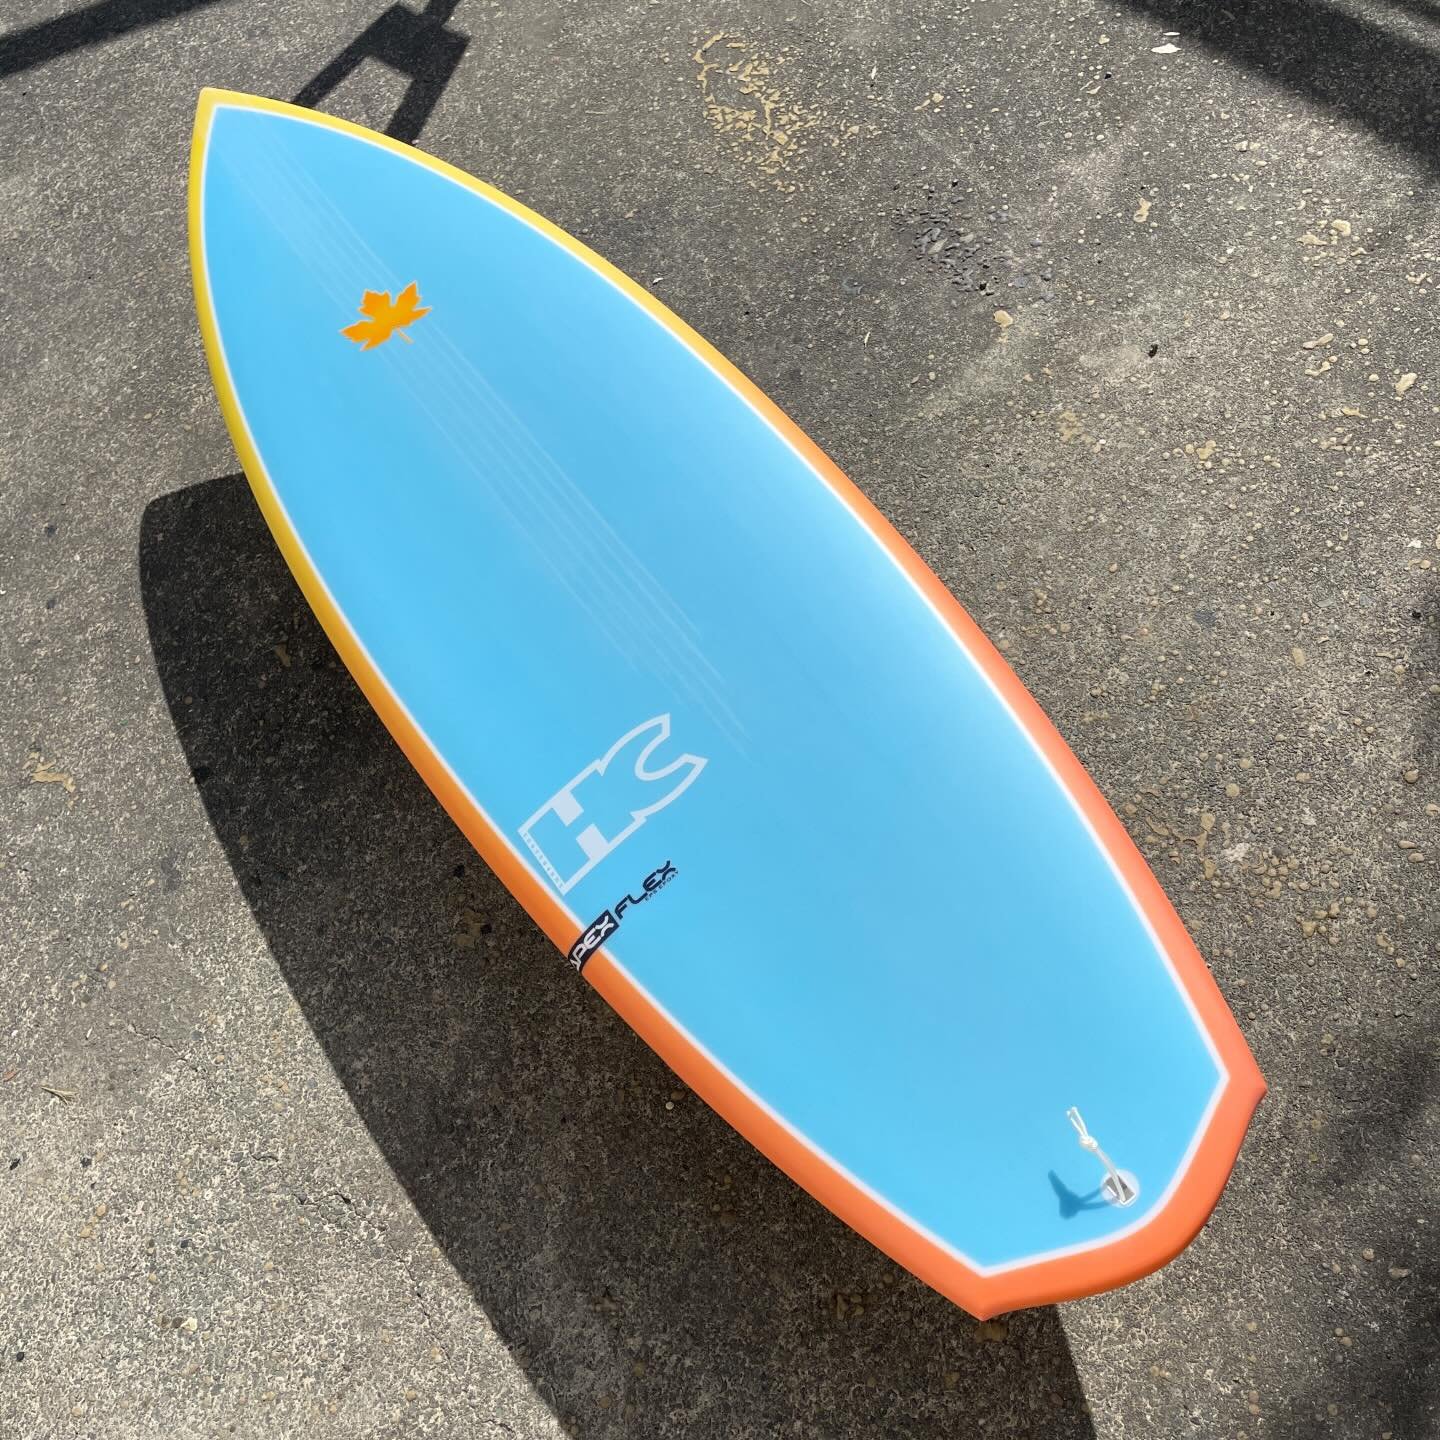 A custom 5&rsquo;8 Apexflex for Kyle. Happy surfing mate 🤙